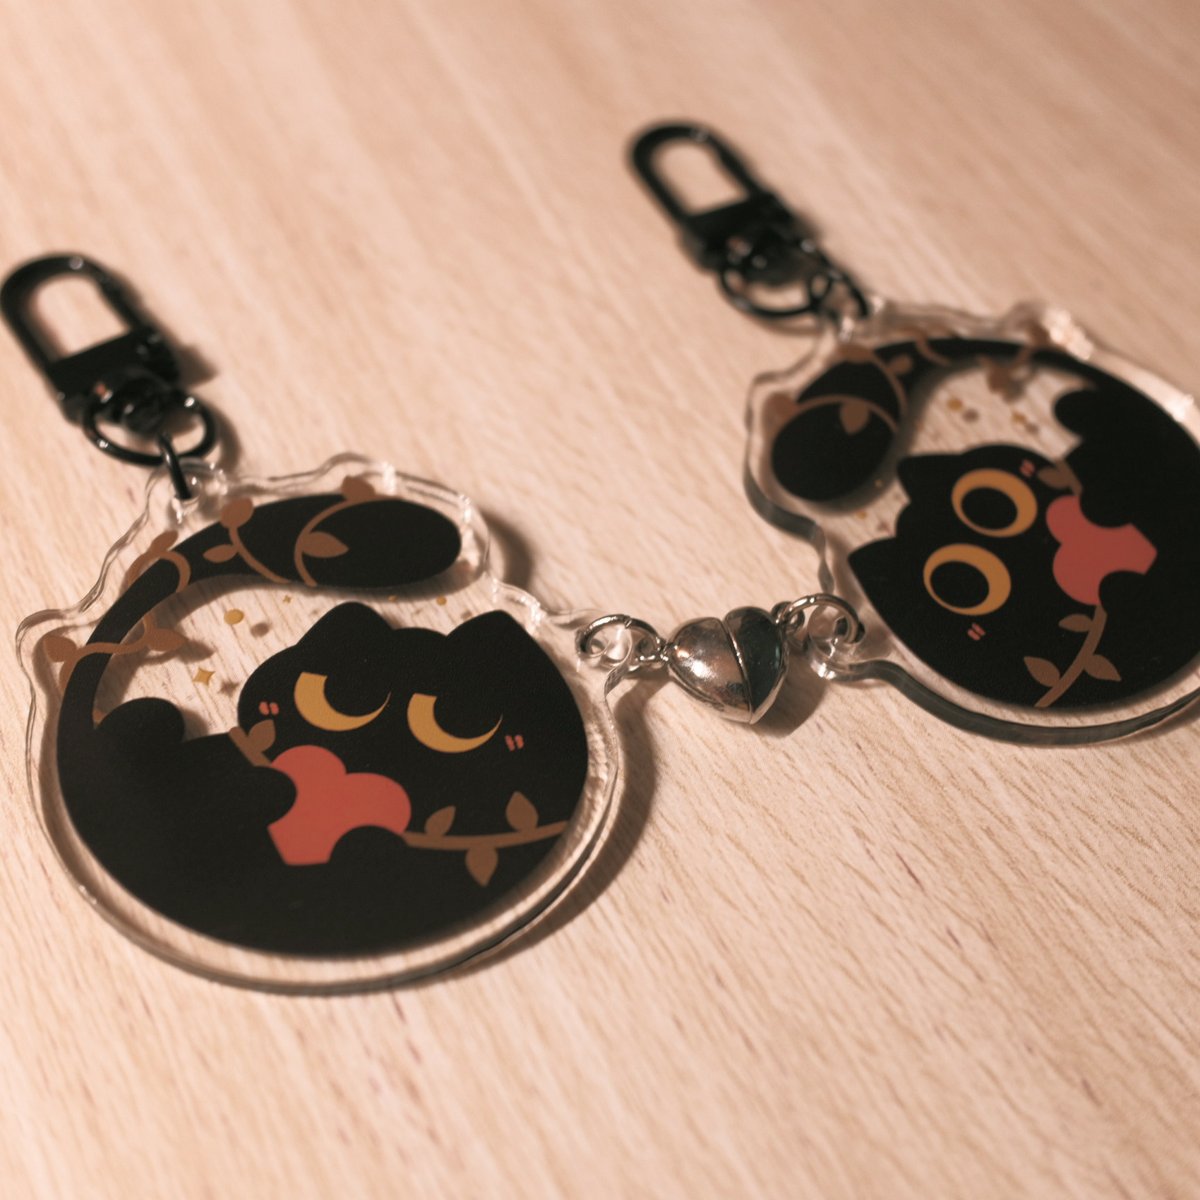 Opening batch 5 for chummy chains pre-order as some people are requesting for it :D ALL chummies are included! Please do take note that I'm only ordering keychains who filled the form! No excess keychains will be available for my online shop ^^